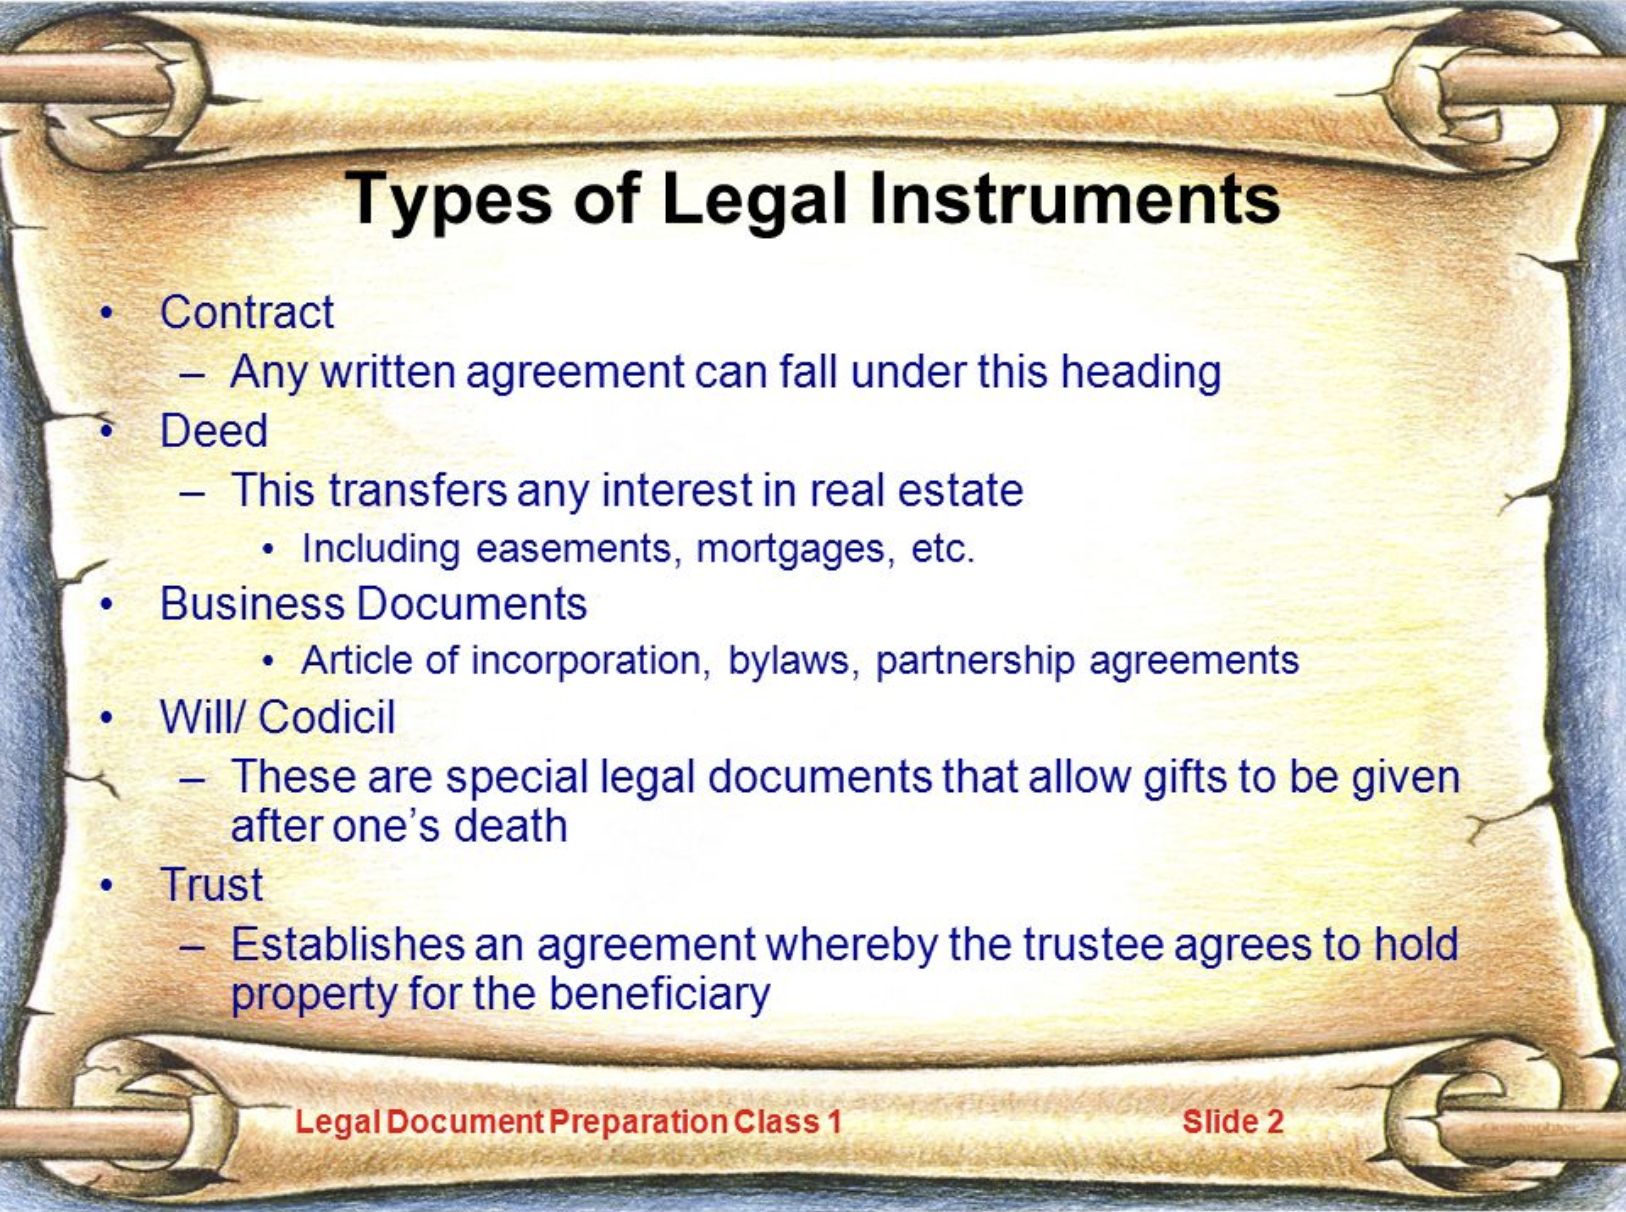 A slide from an introductory course on legal instruments, randomly selected from Google Images.